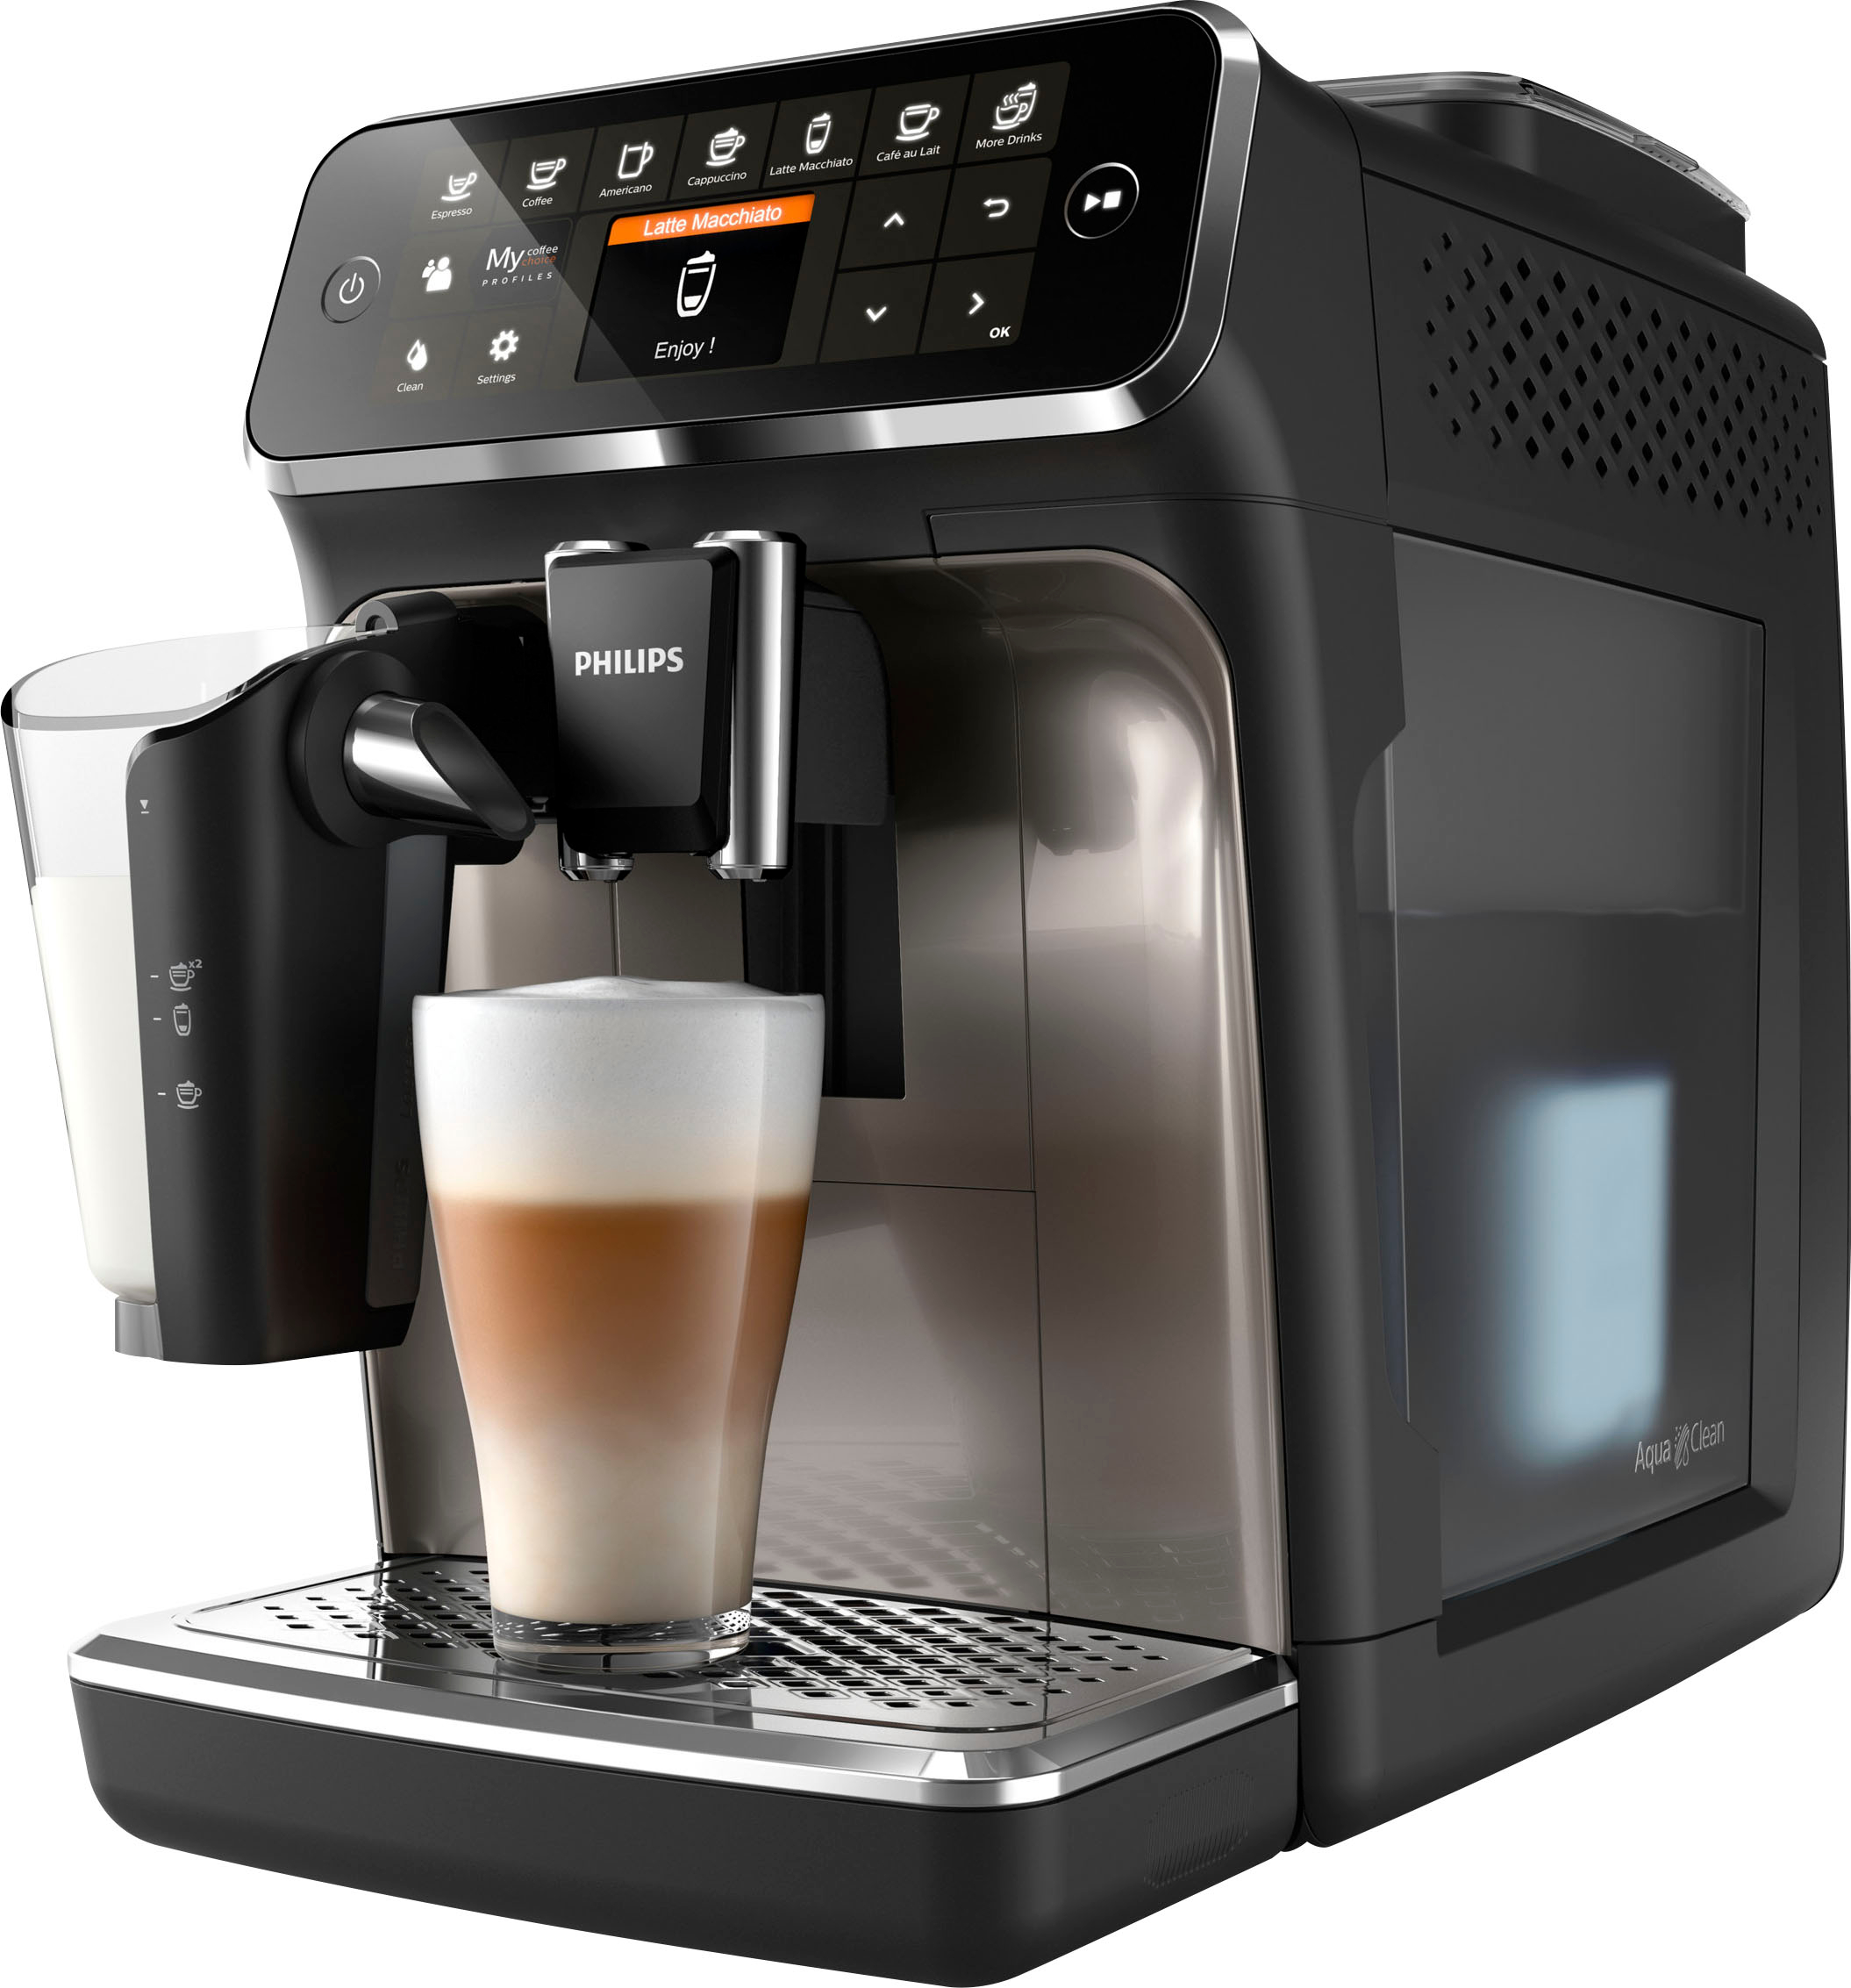 Philips 1200 Series Fully Automatic Espresso Maker With Milk